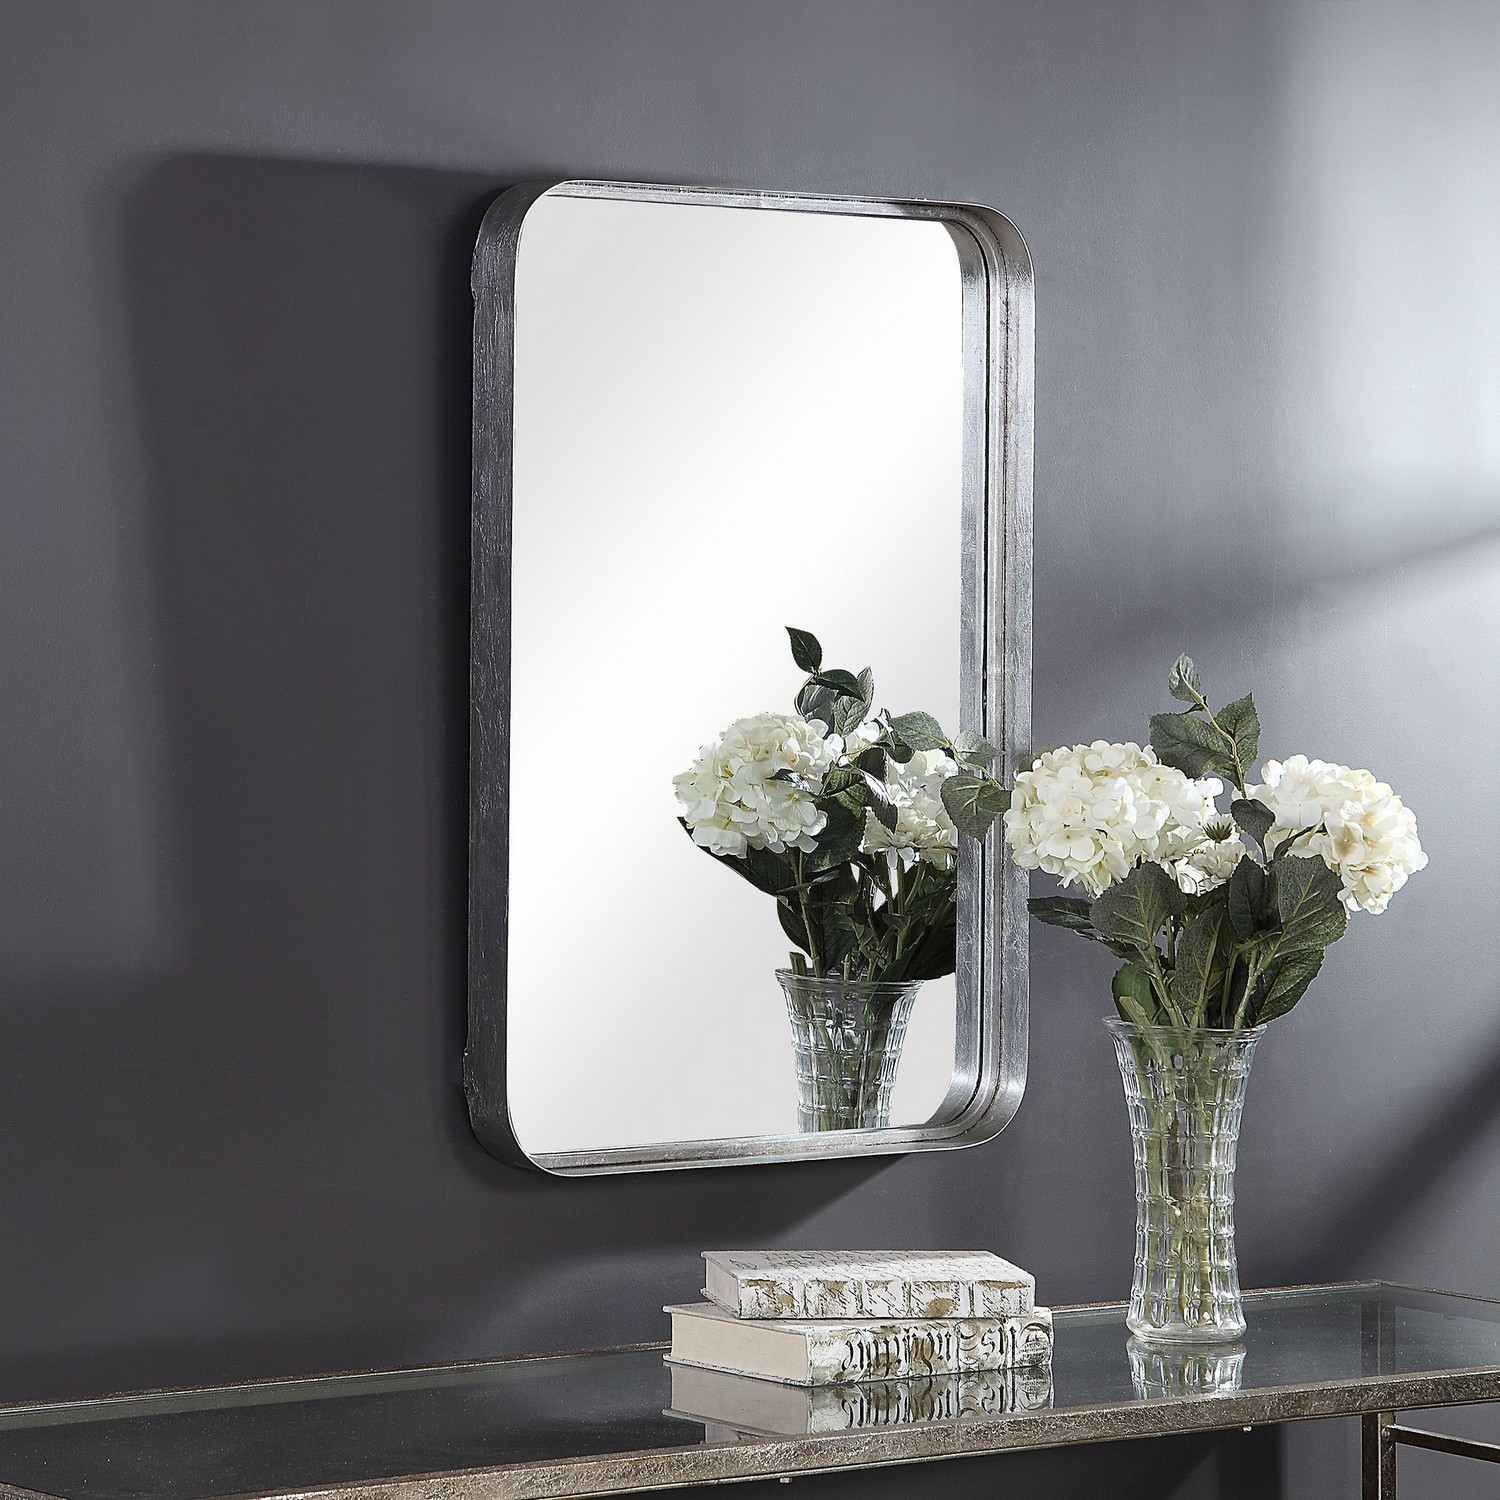 ABC Accent ABC-00451 Mirror - Burnished Silver Leaf